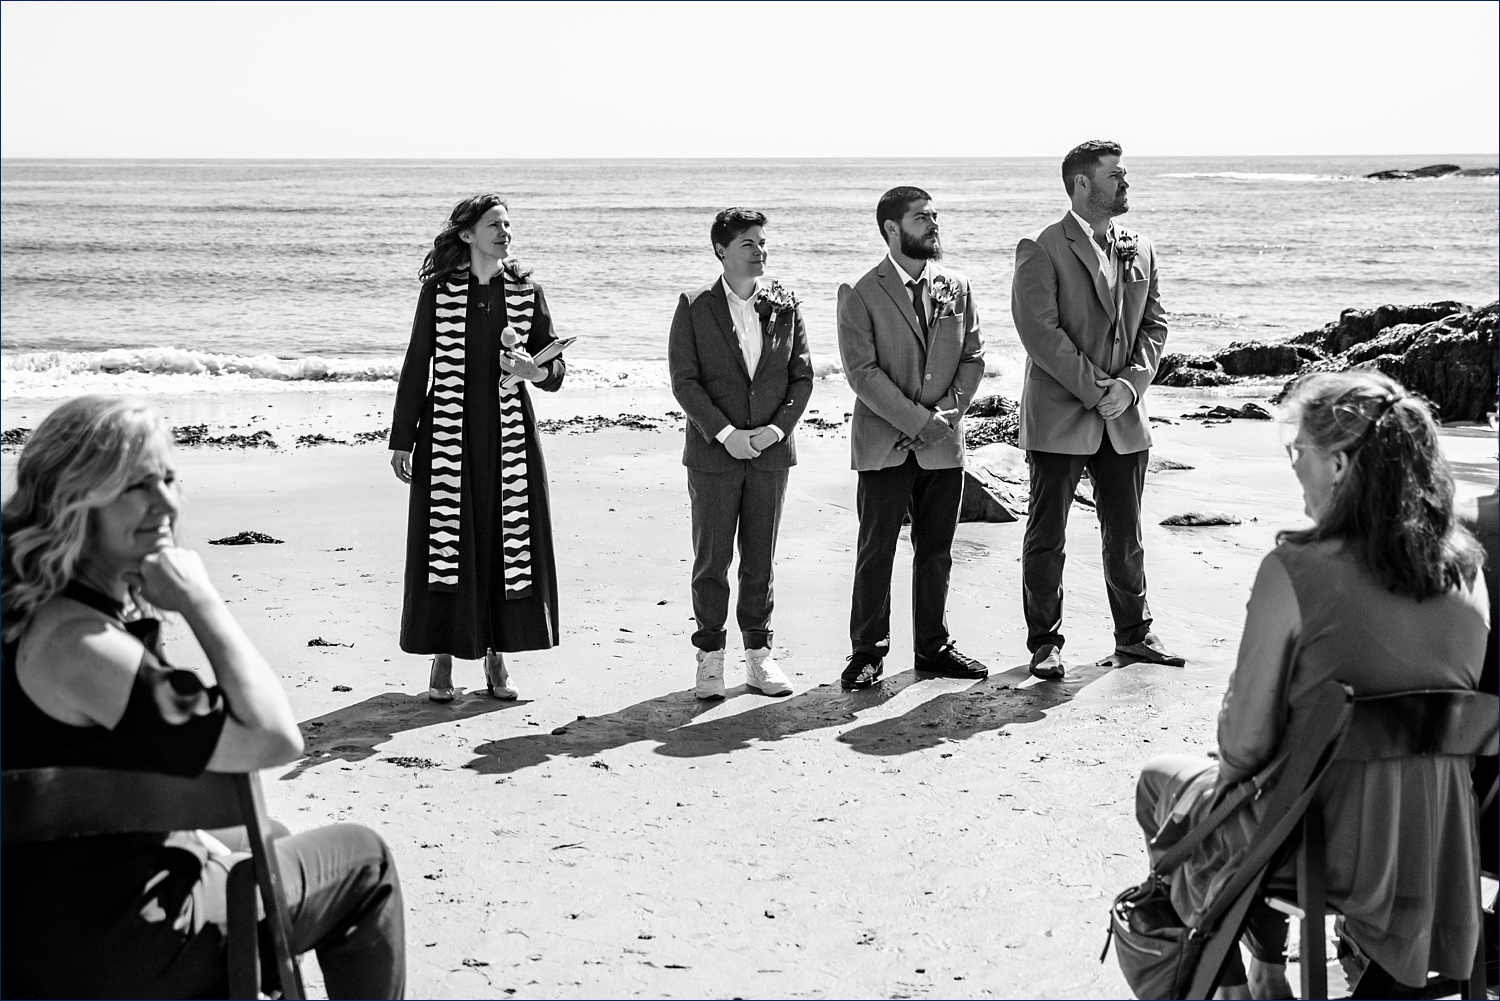 Kaylyn waits for her bride to come to the ceremony with her brothers on the beach